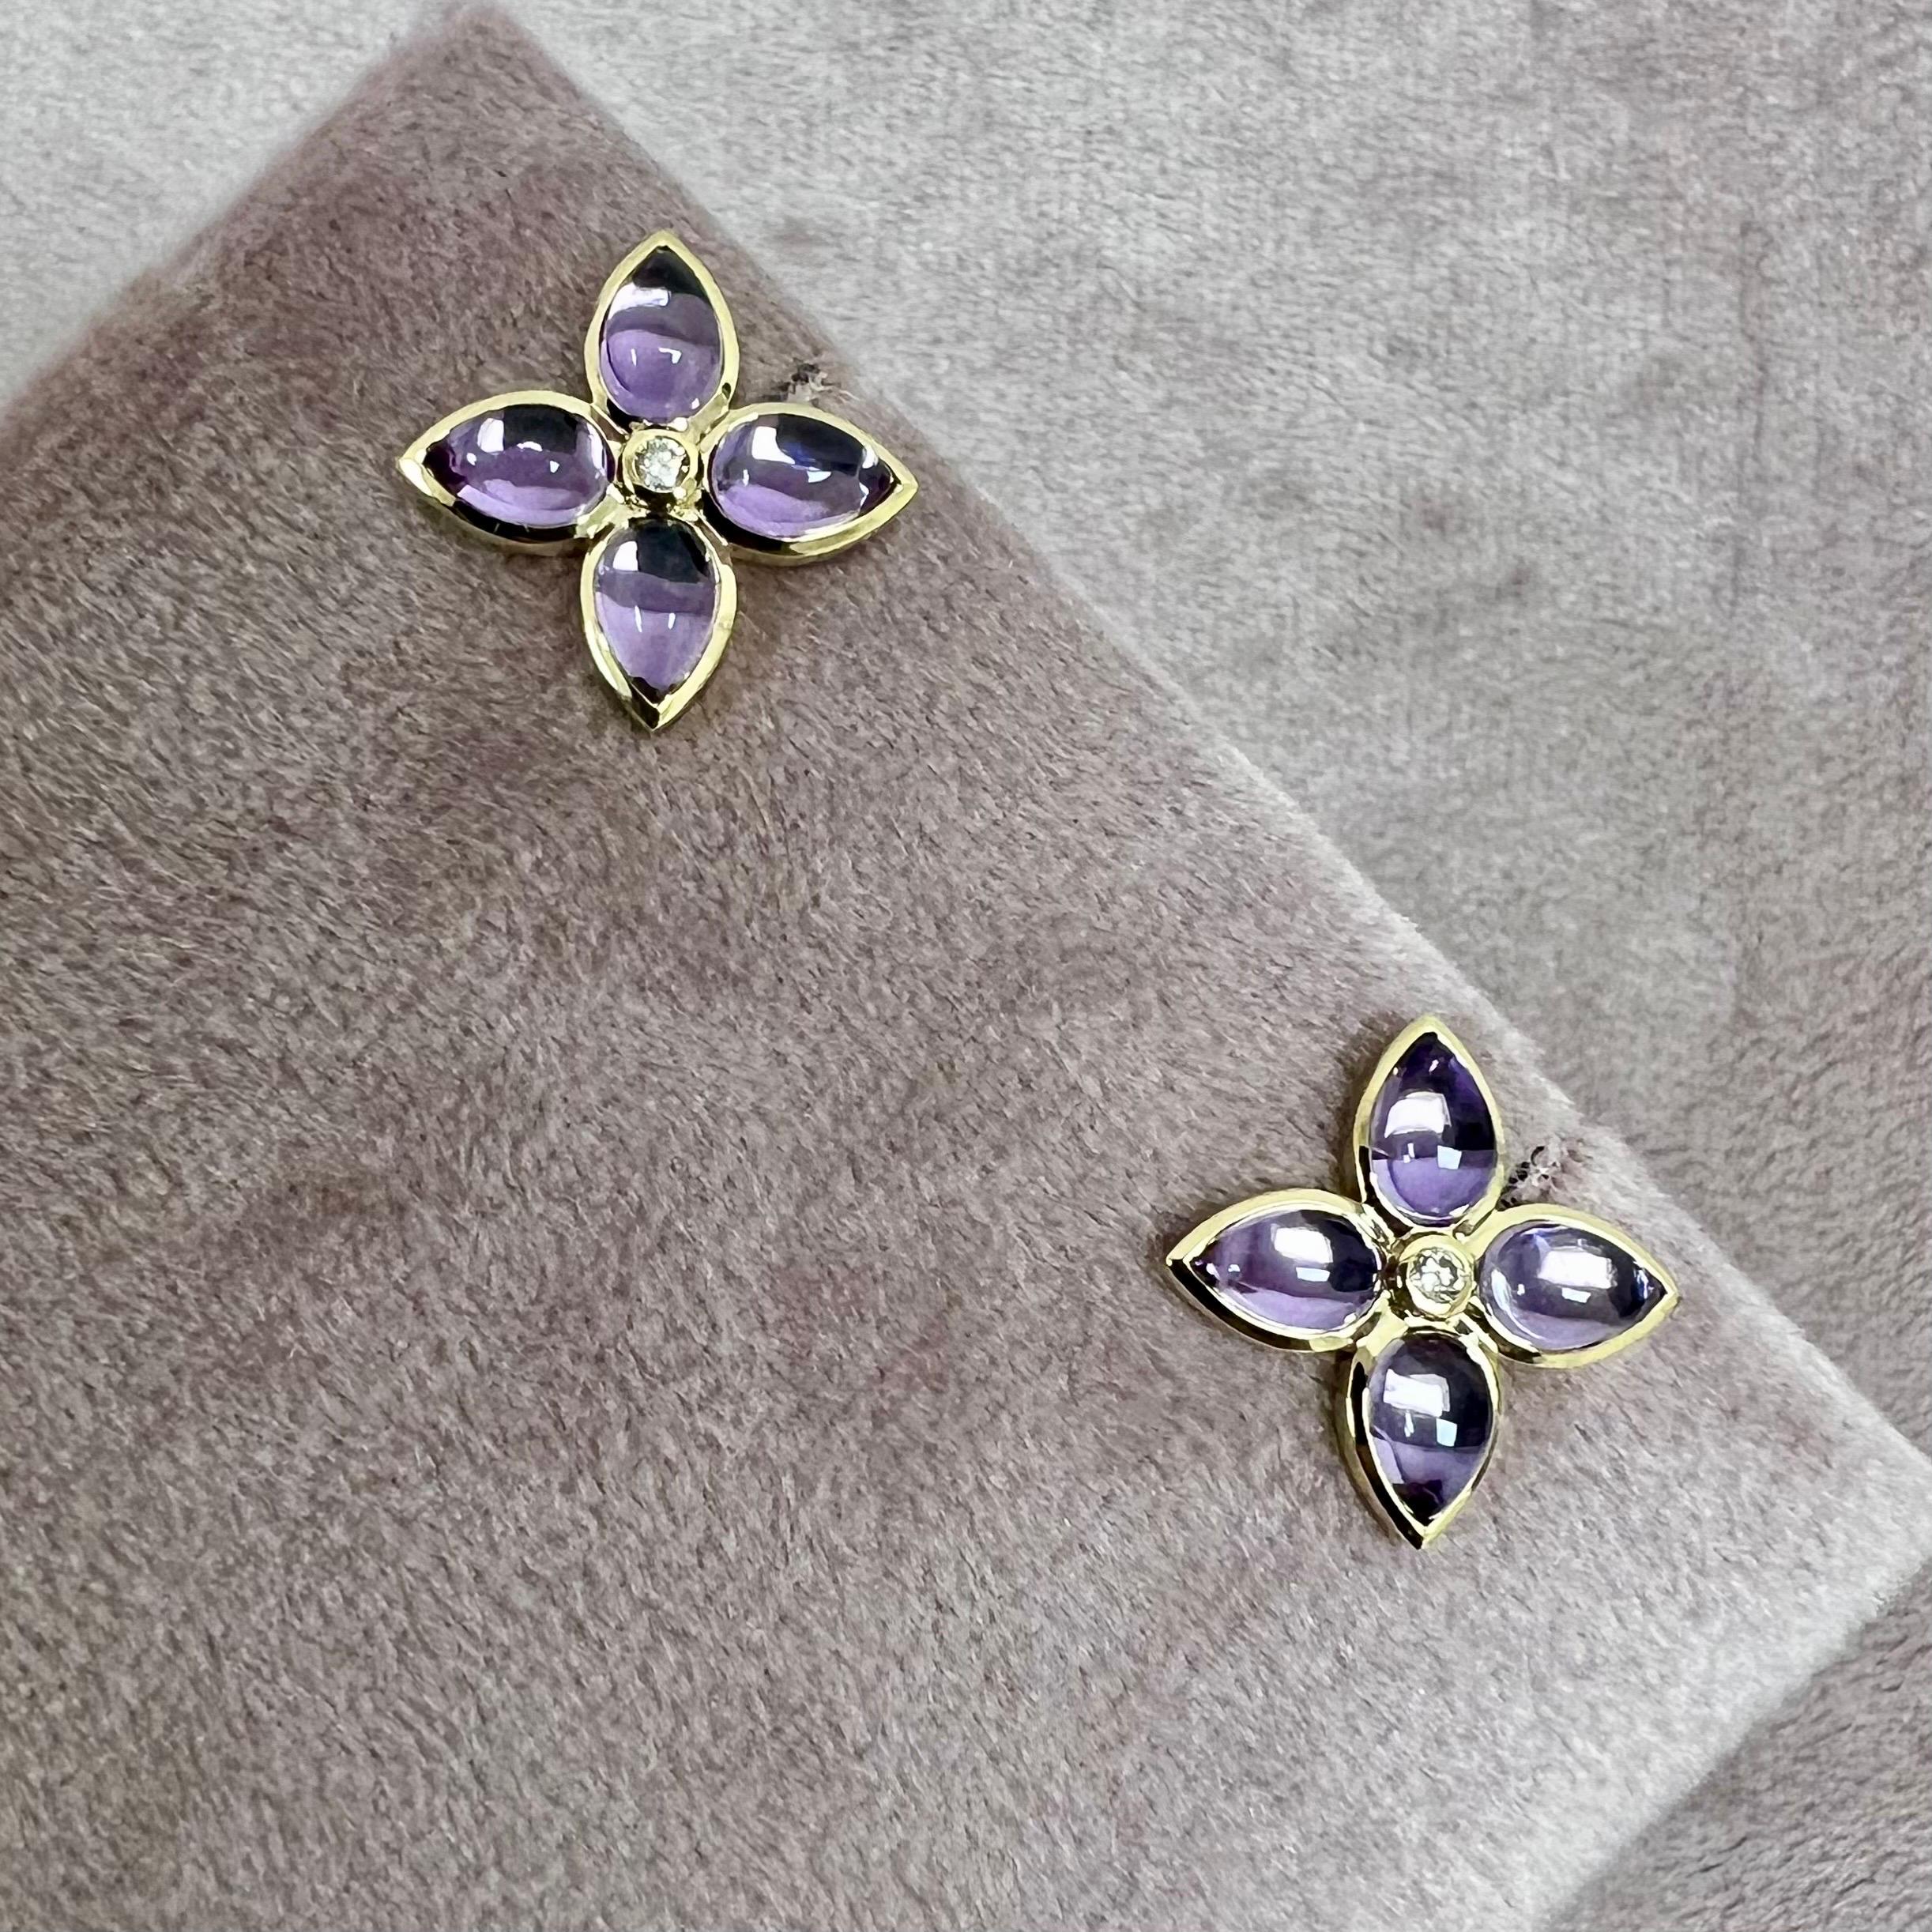 Created in 18 karat yellow gold
Amethyst 3.50 carats approx.
Diamonds 0.05 carat approx.
Post backs for pierced ears
Limited edition

Set the scene with these exquisite Jardin Gemstone Flower Studs. Crafted with 18 karat yellow gold, the studs are